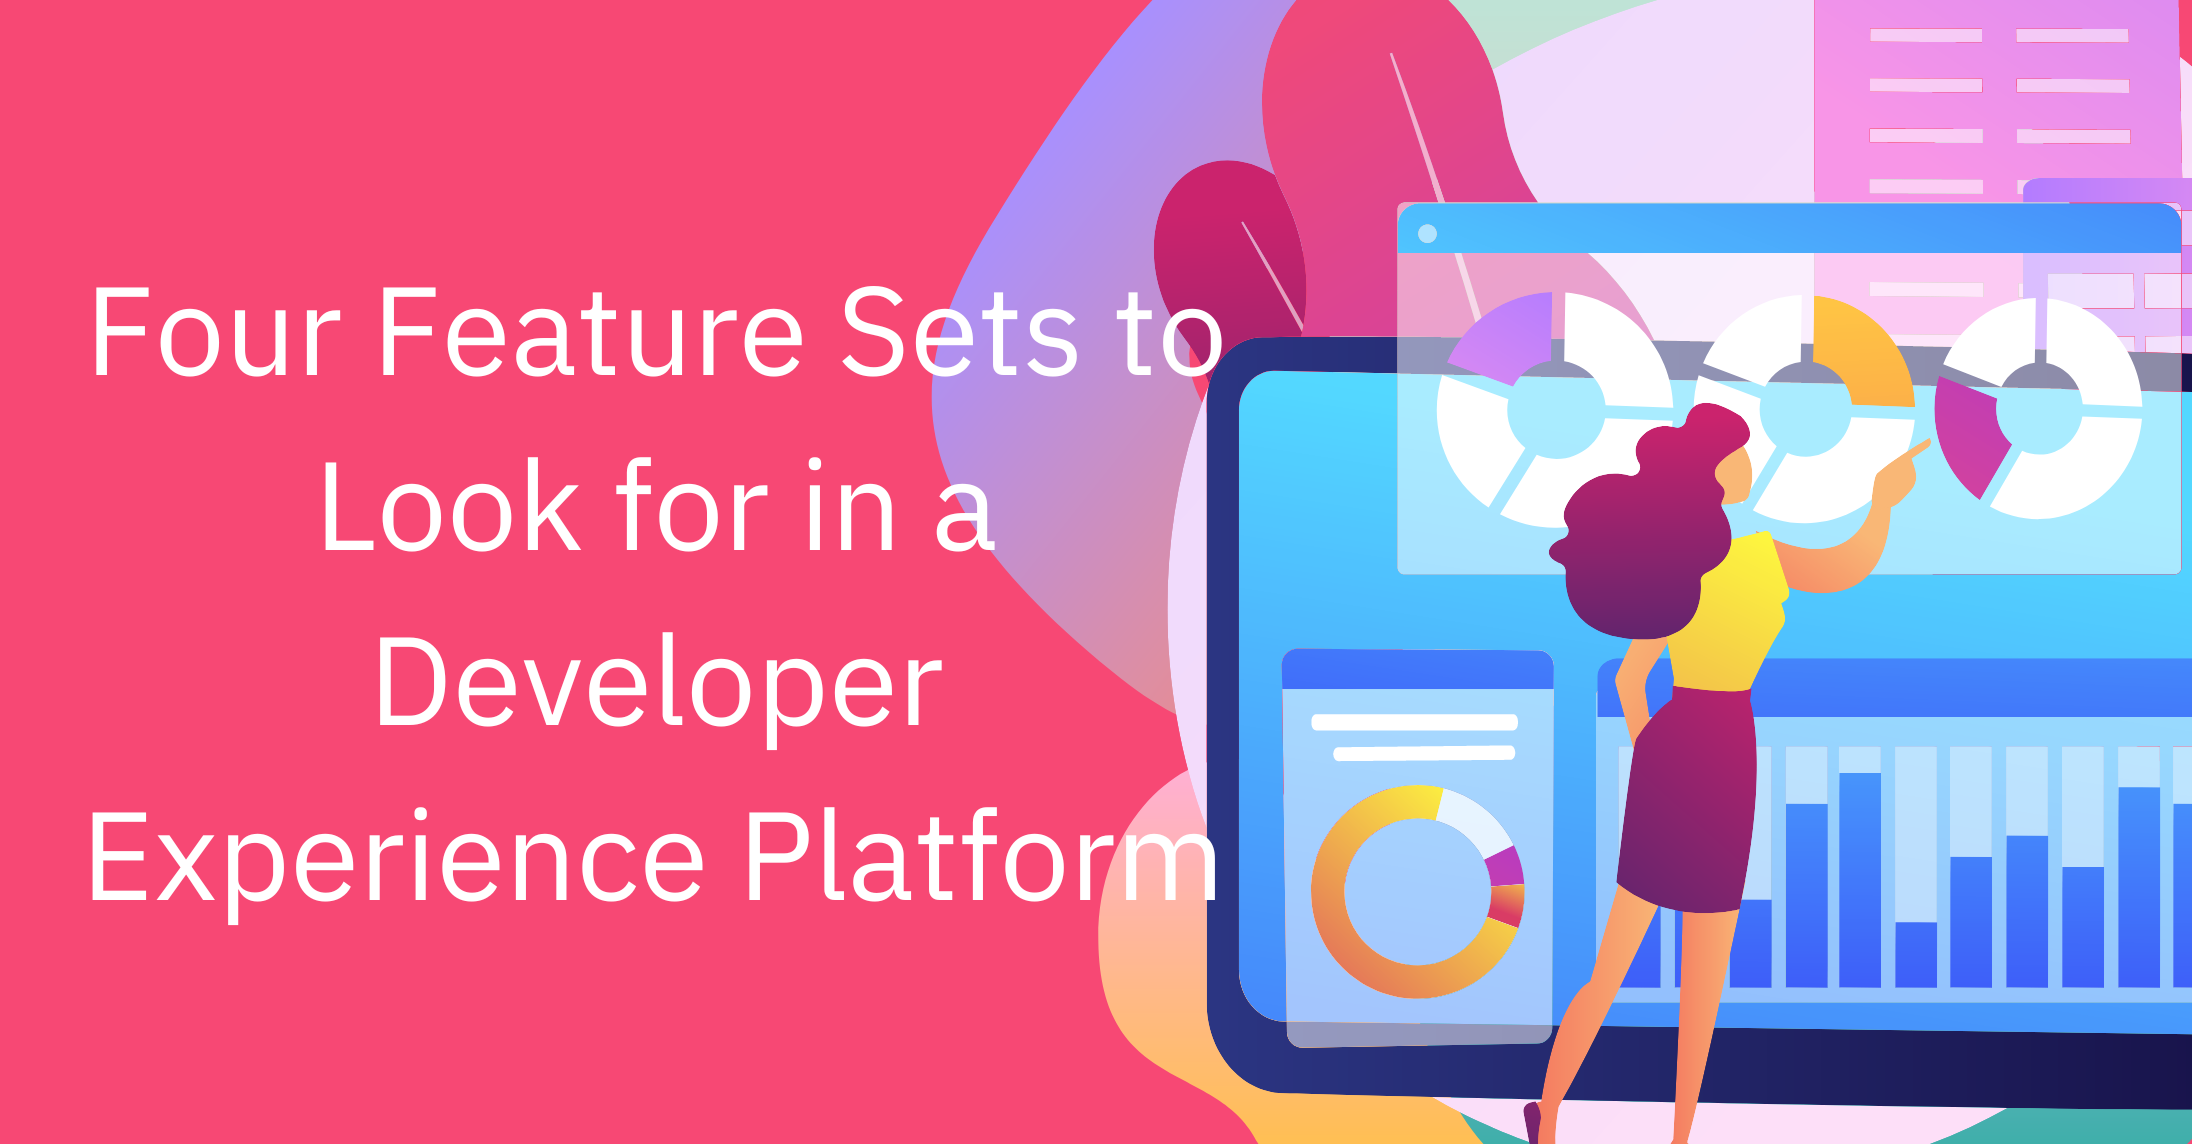 Four Feature Sets to Look for in a Developer Experience Platform  